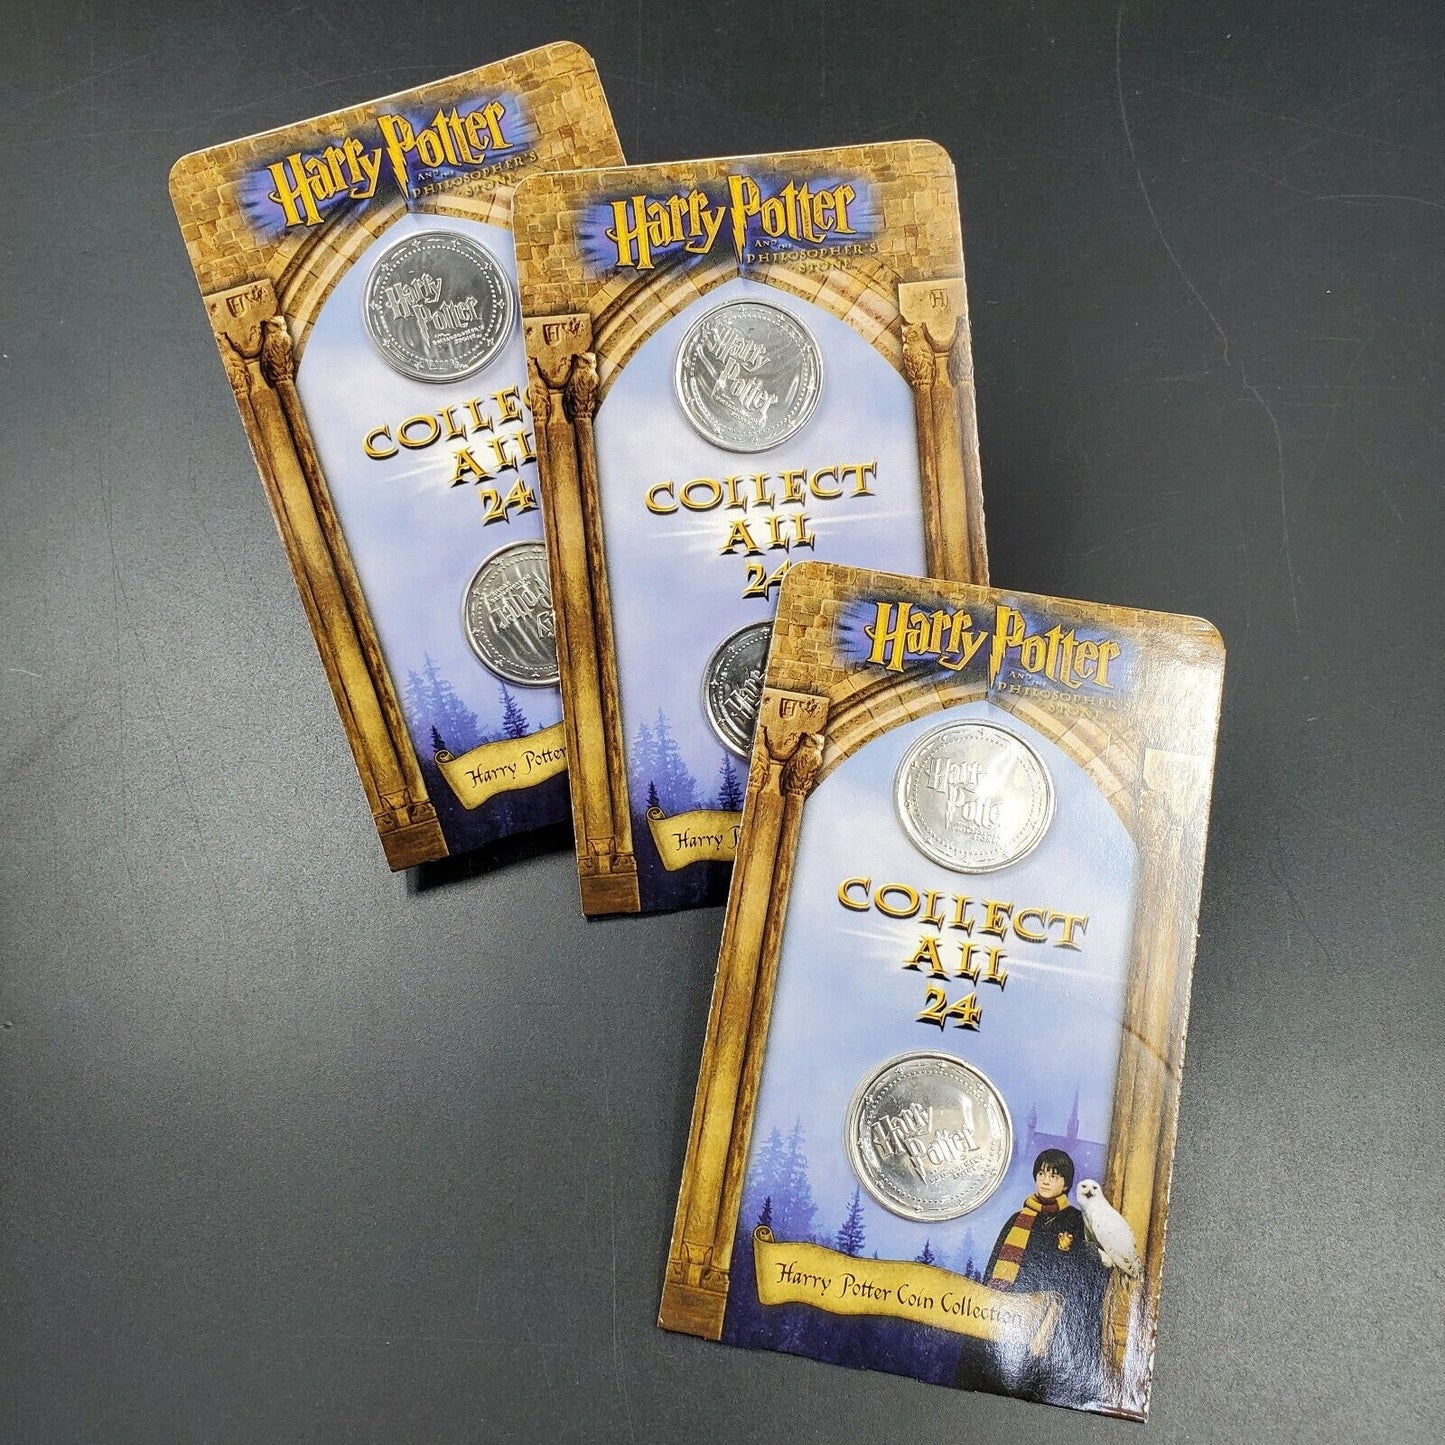 Harry Potter Collect All 24 - 2 Coin Card OGP Collection Set Warner Bros License